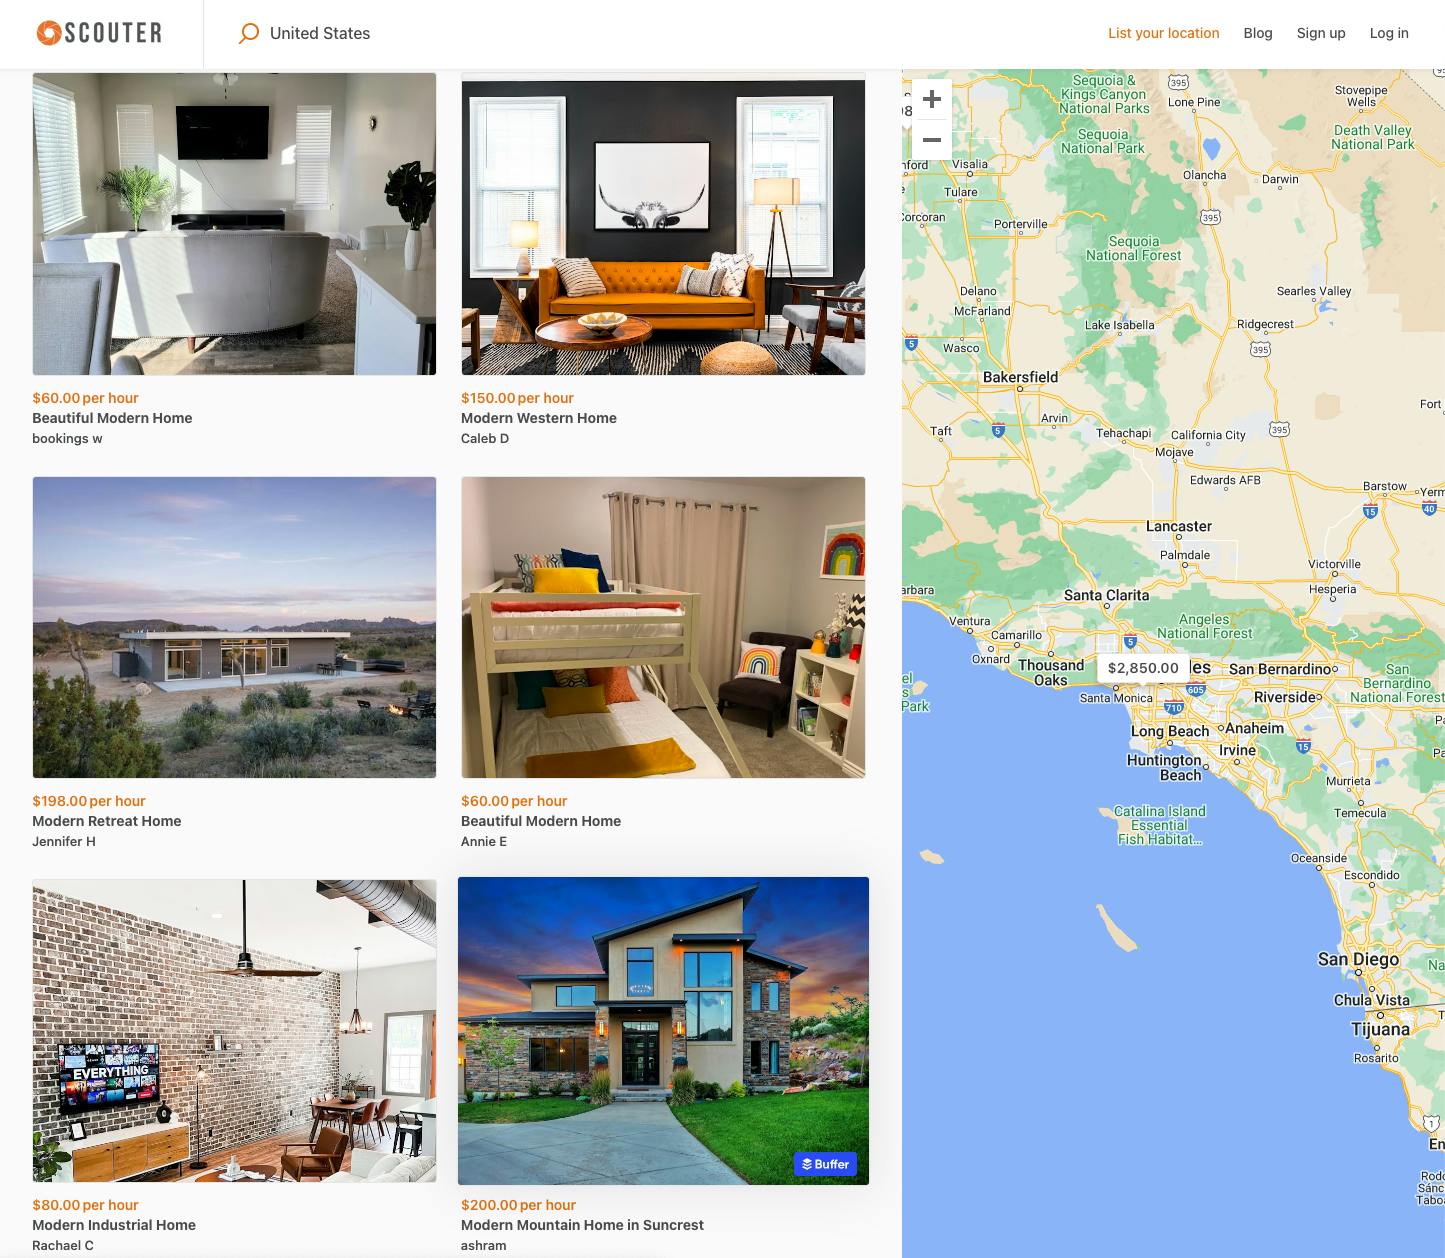 Screenshot of listings in the category "Modern homes" on Scouter, a Sharetribe-powered rental marketplace for filming and photography locations.